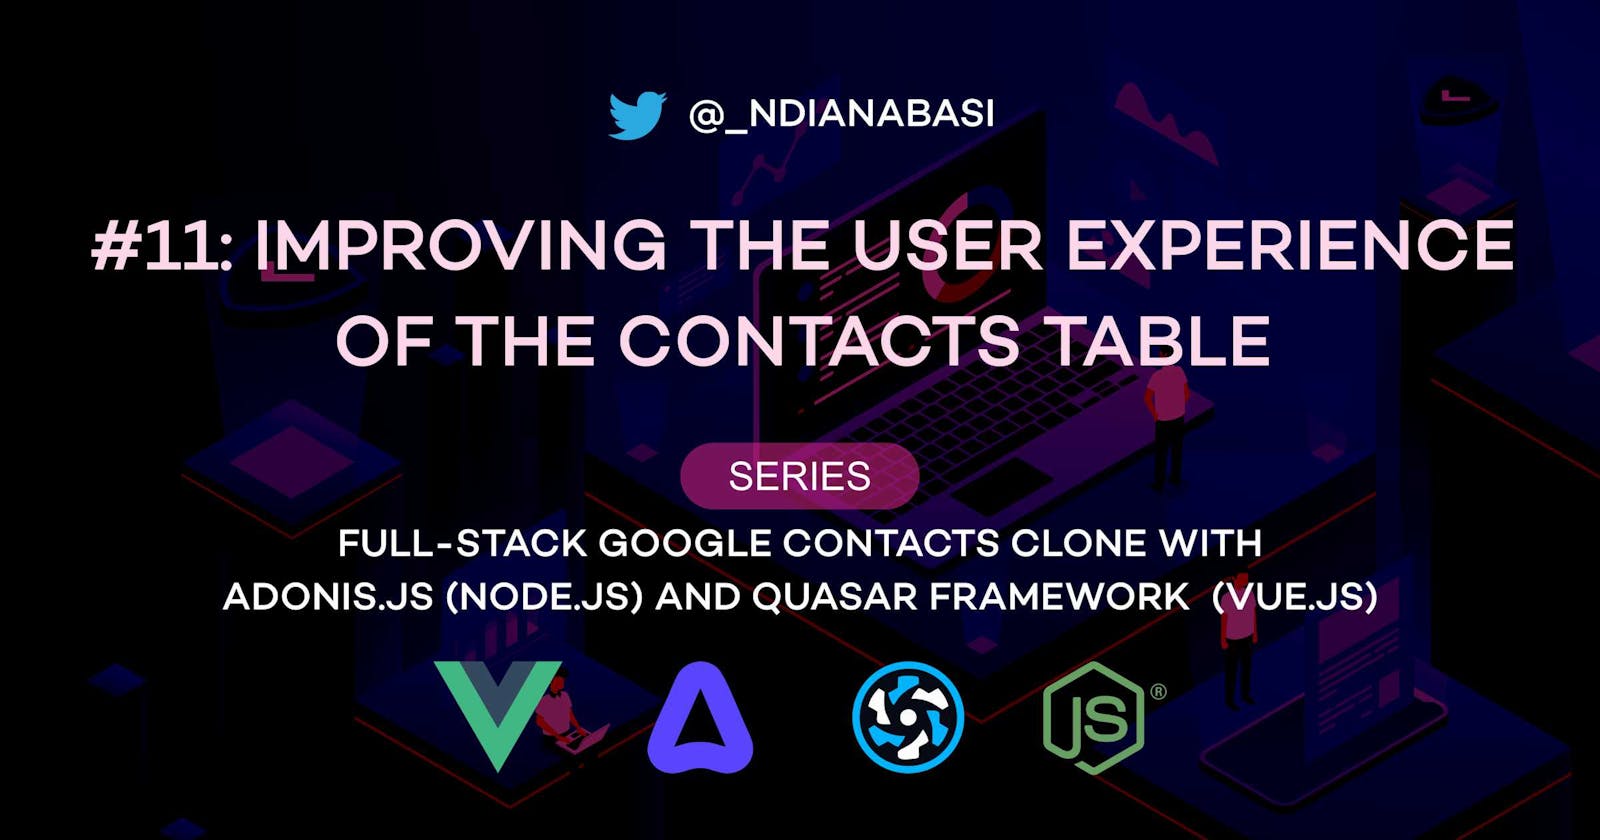 Improving User Experience with the Contacts Table | Full-Stack Google Contacts Clone with Adonis.js/Node.js and Quasar (Vue.js)